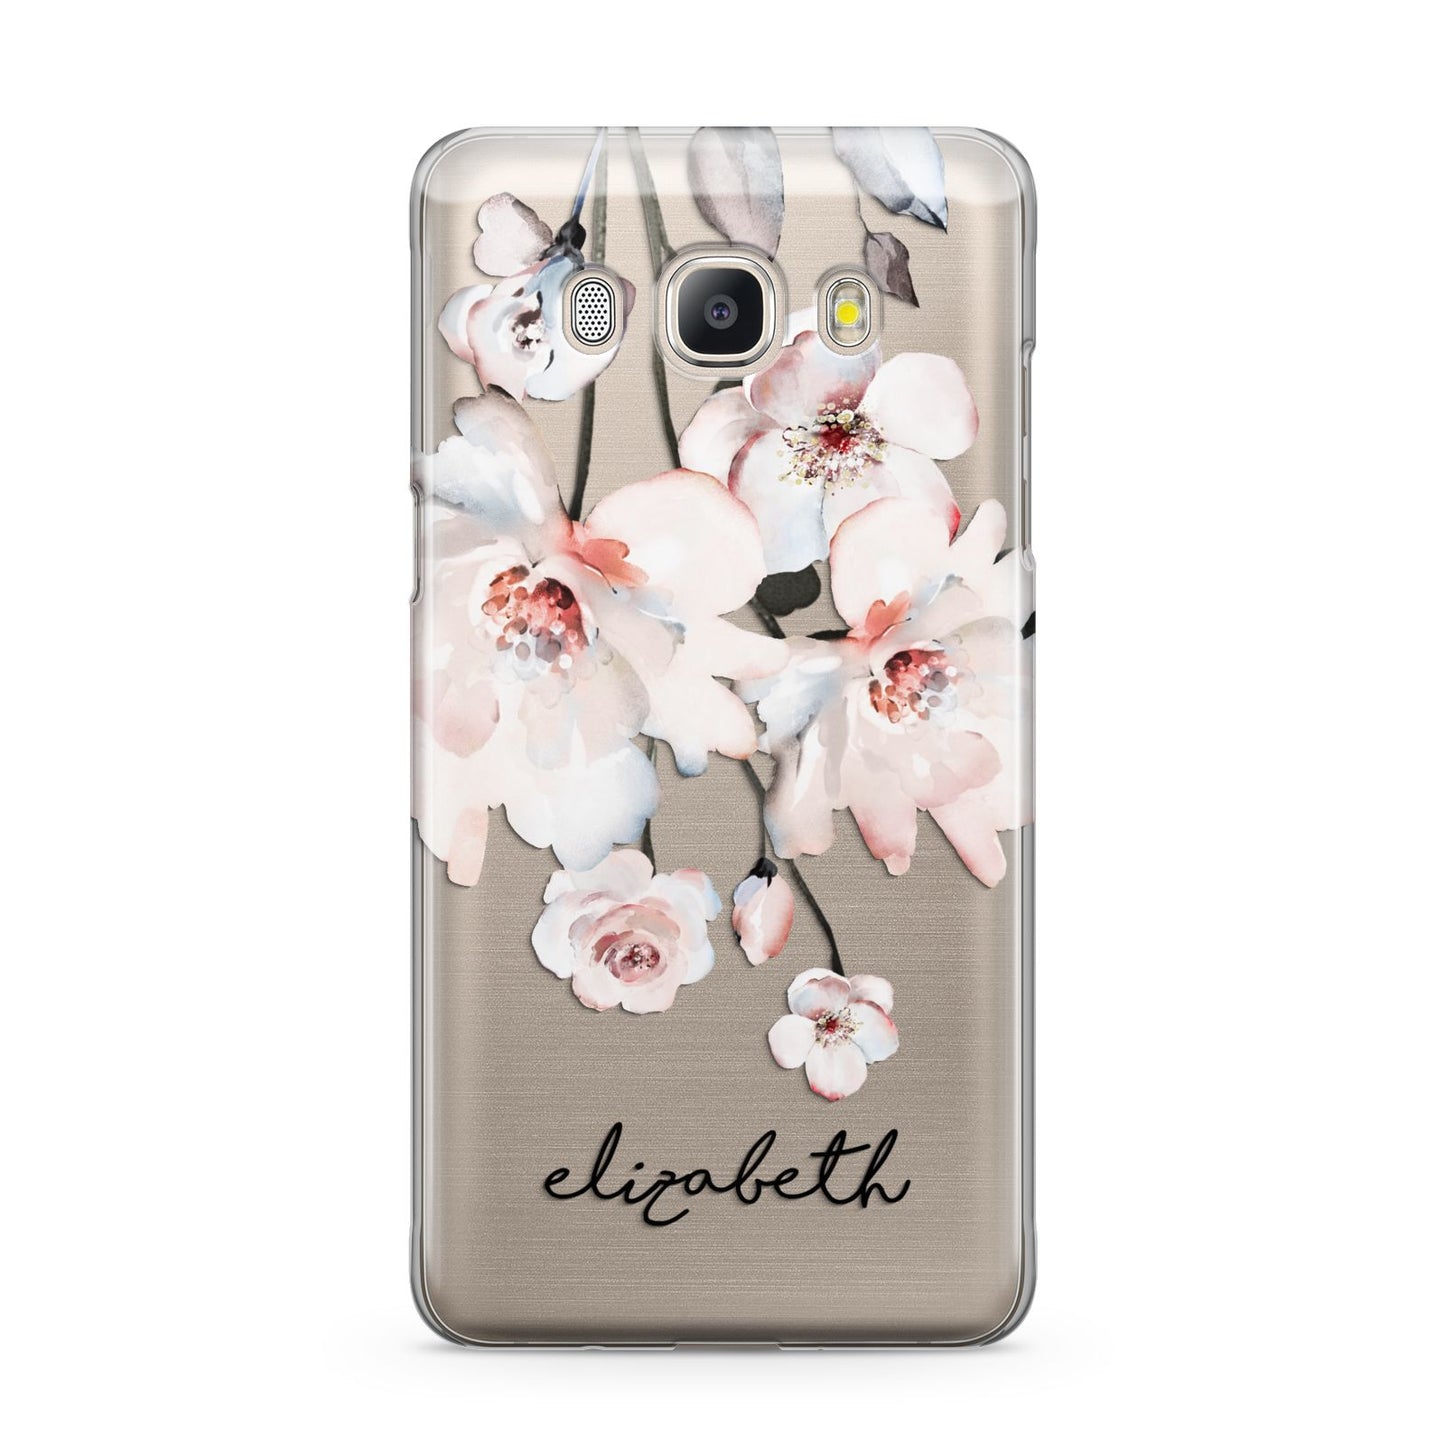 Personalised Name Roses Watercolour Samsung Galaxy J5 2016 Case